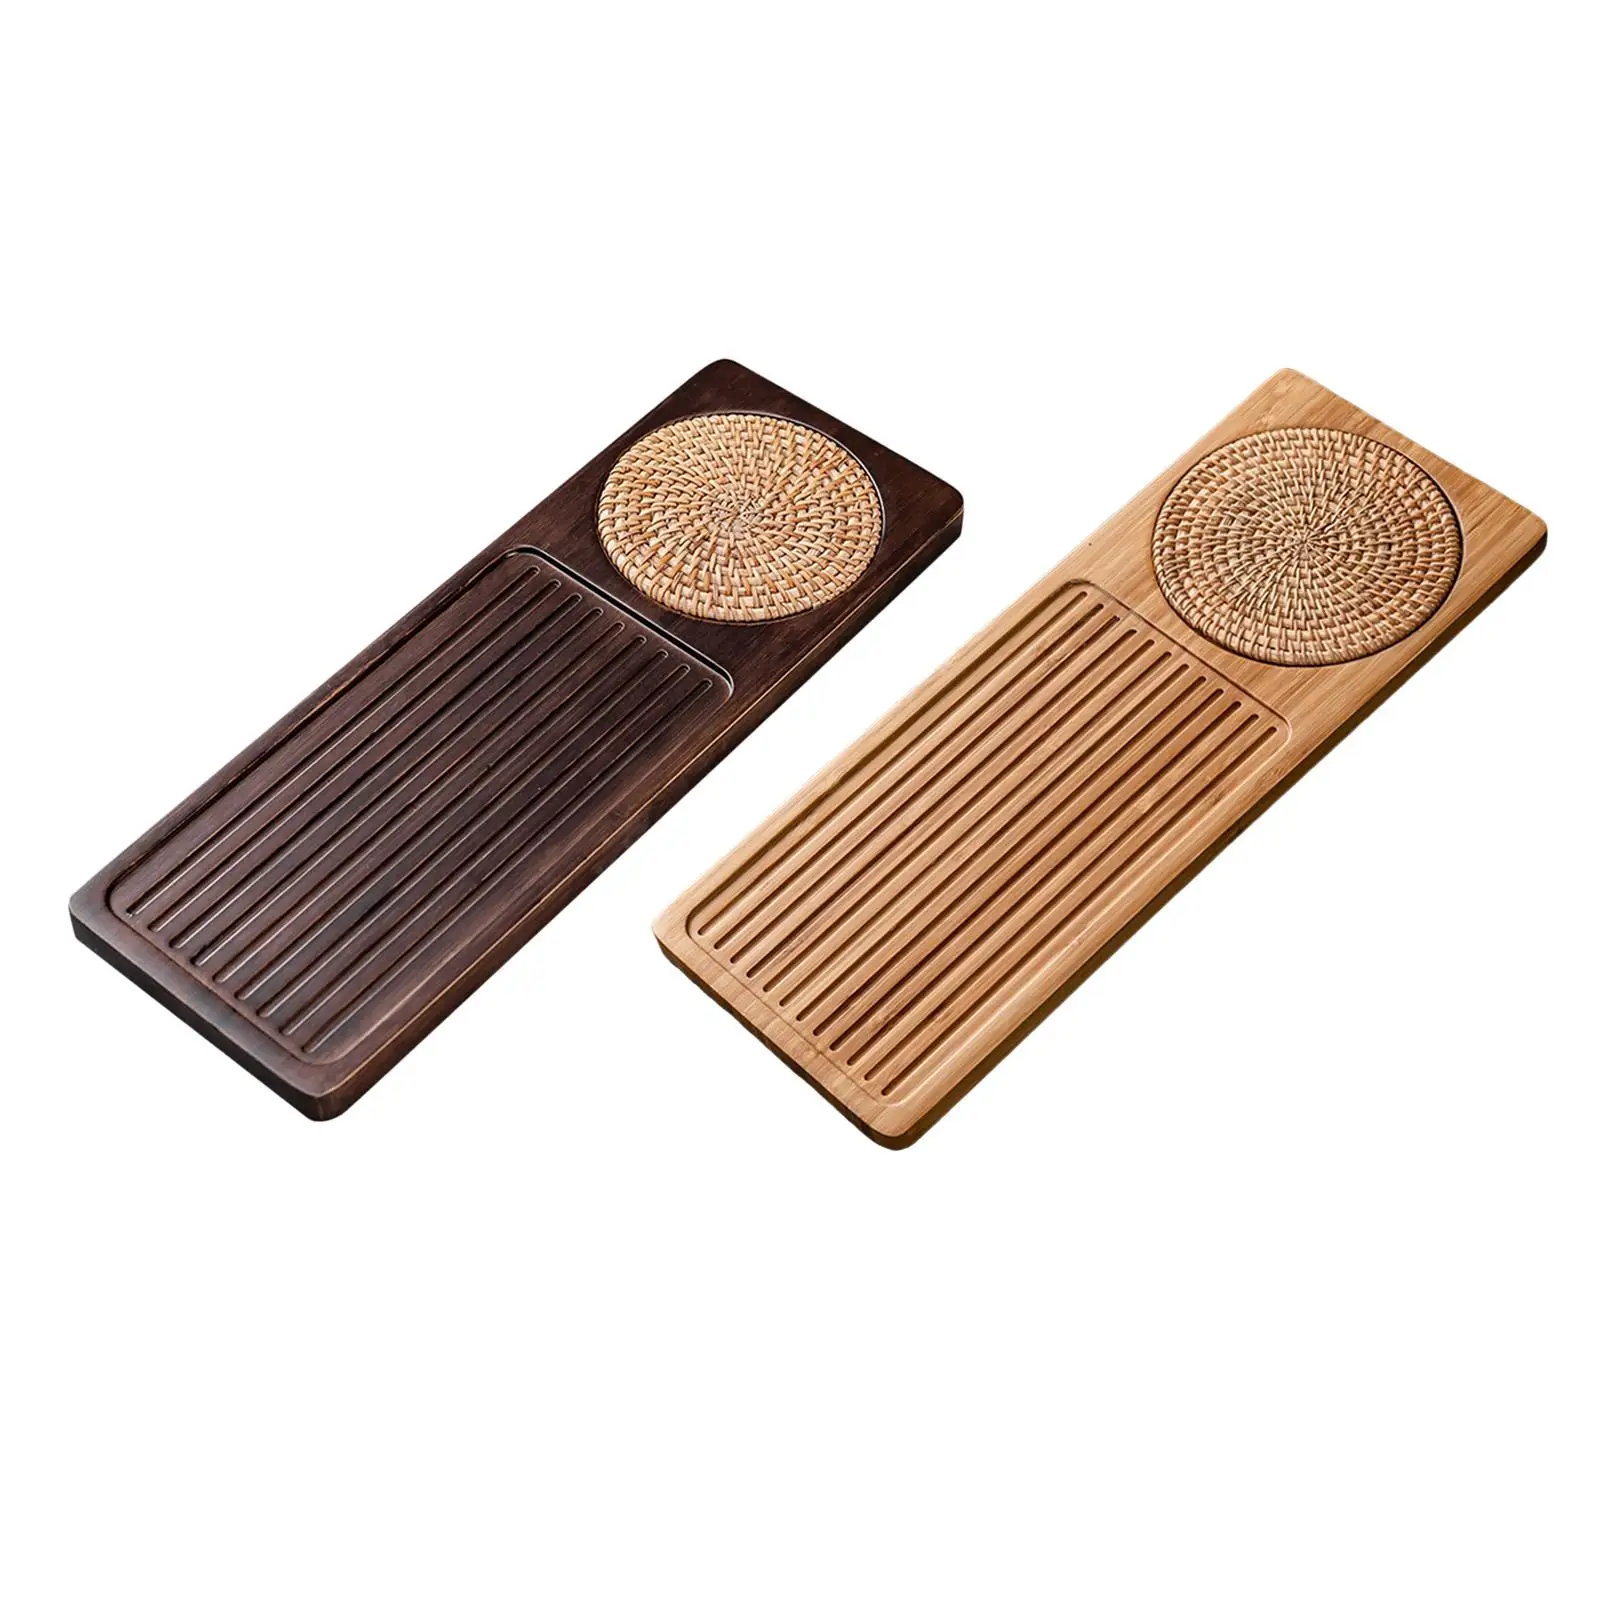 Traditional Bamboo Wood Tea Serving Tray for Travel 